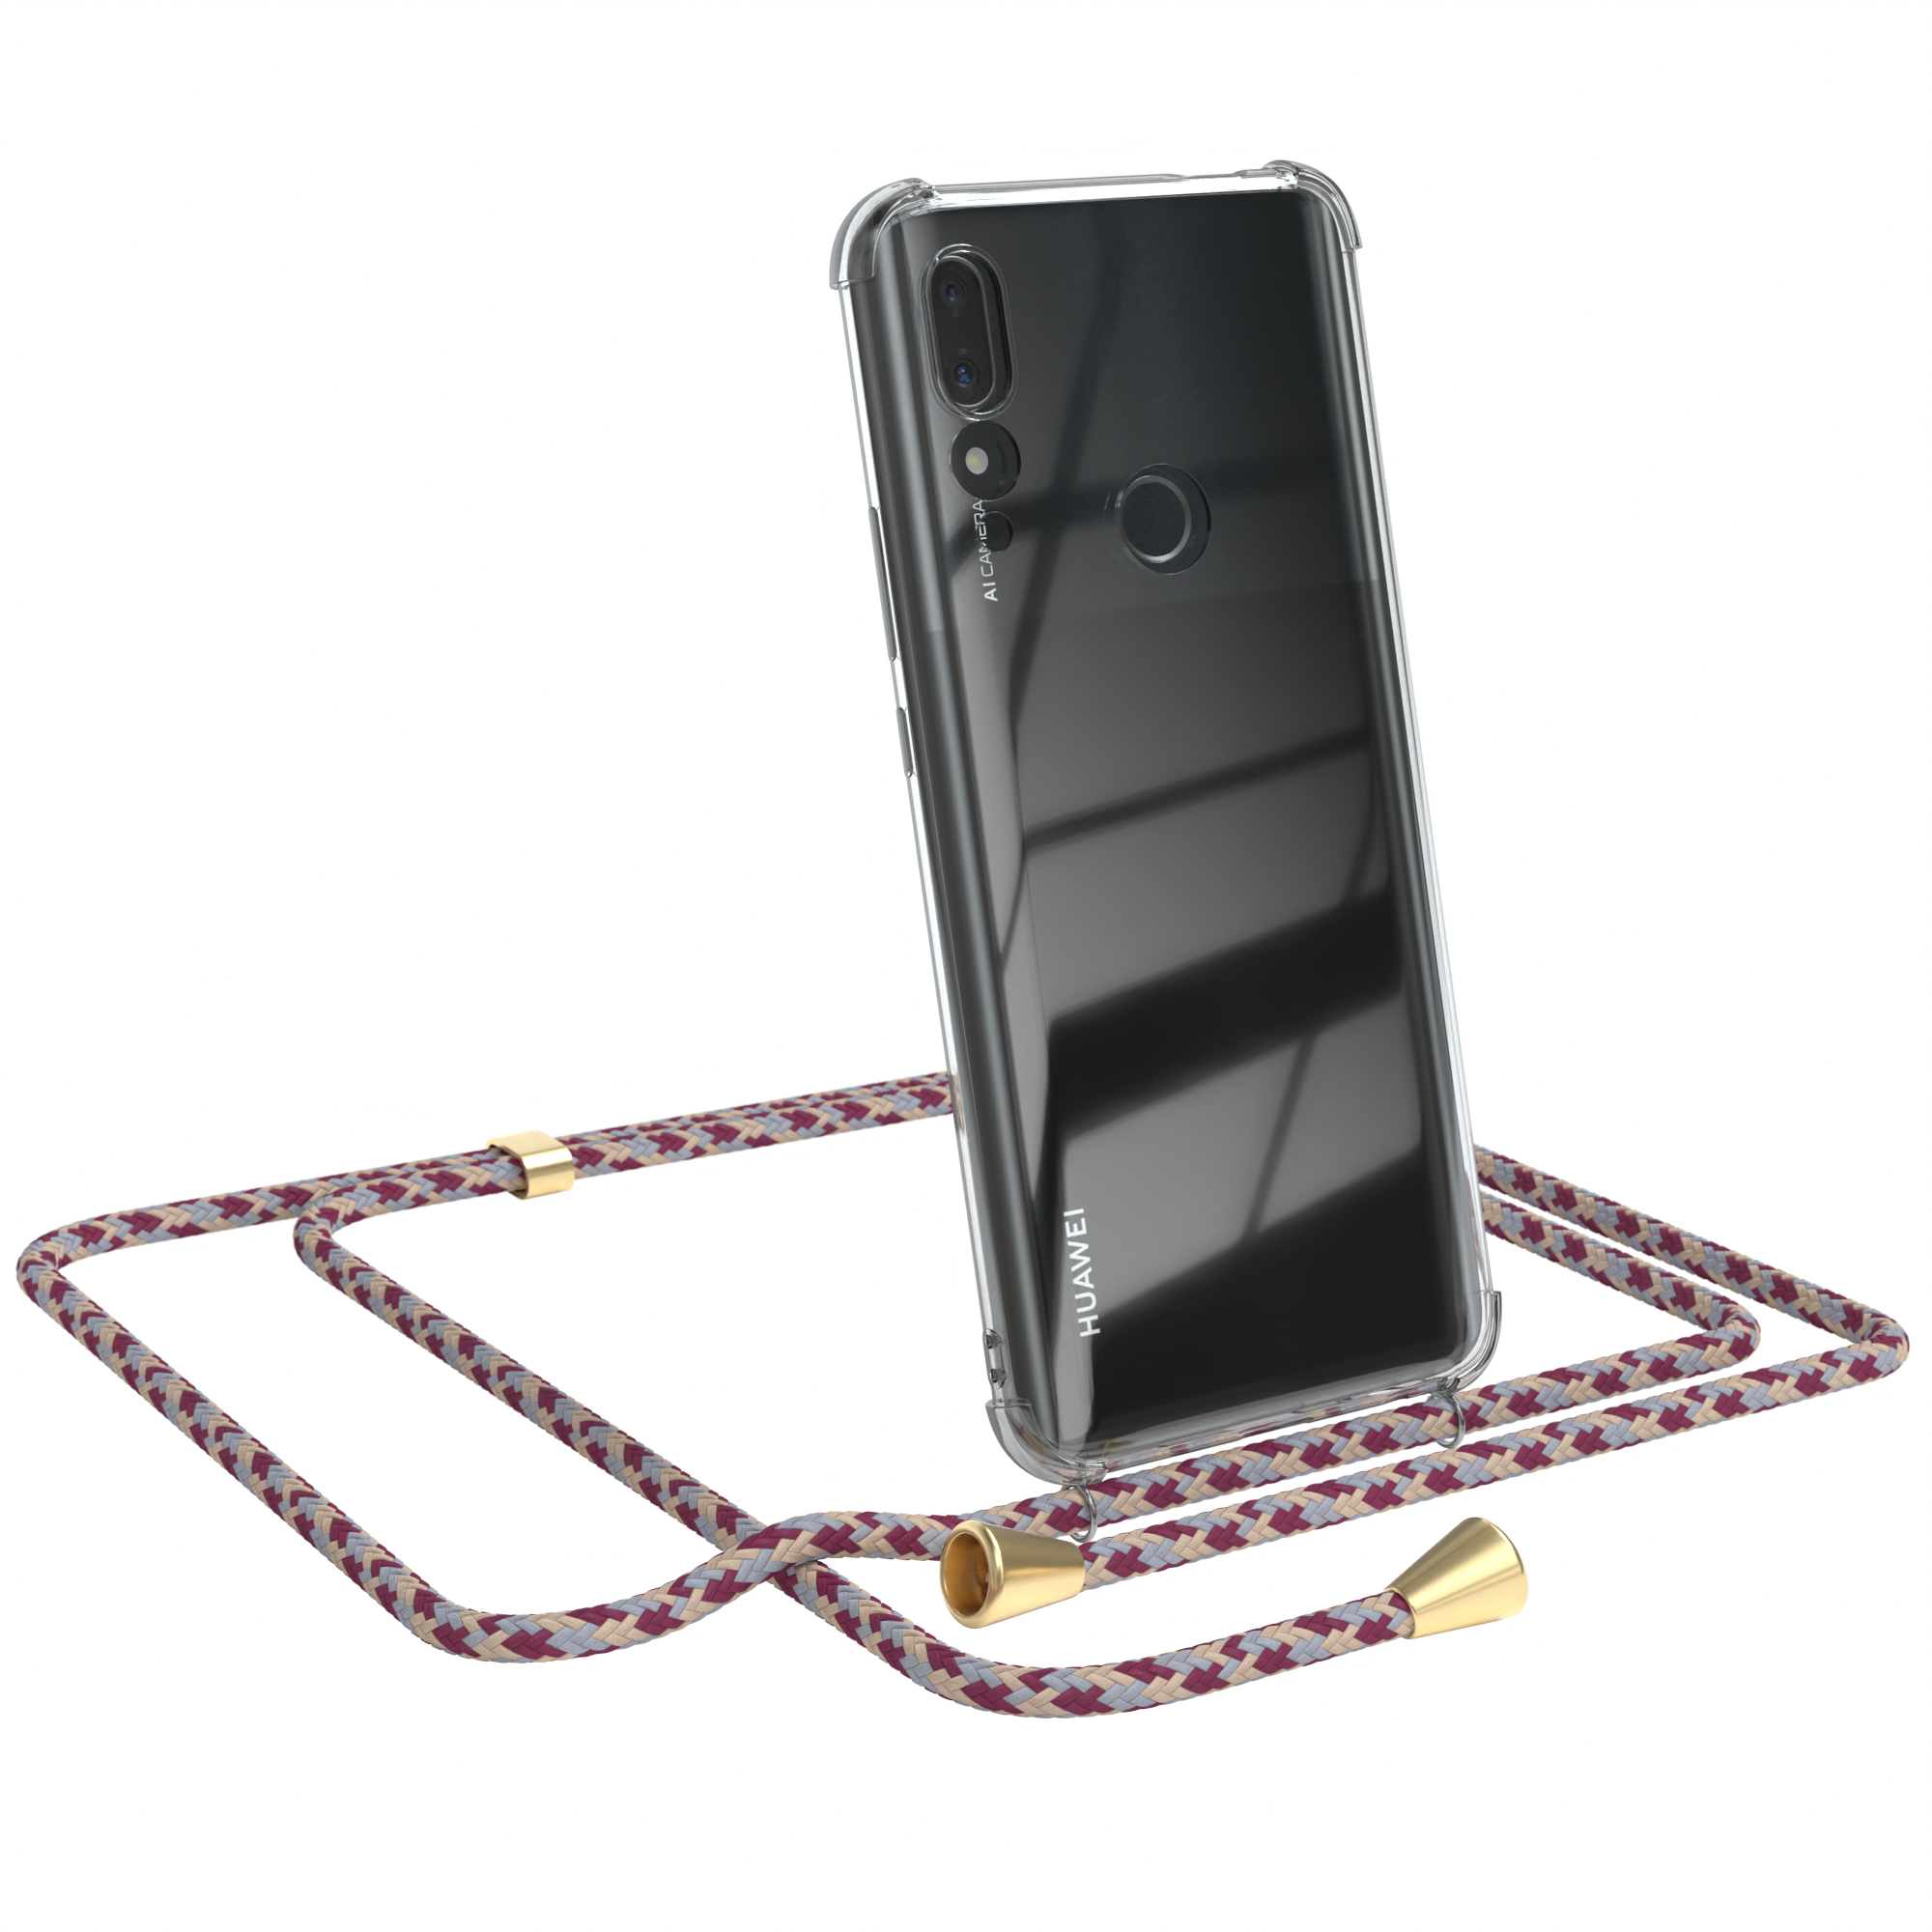 / (2019), Clips Umhängetasche, Prime Huawei, / Camouflage Z Cover P CASE Gold Umhängeband, Rot Beige Clear mit EAZY Smart Y9